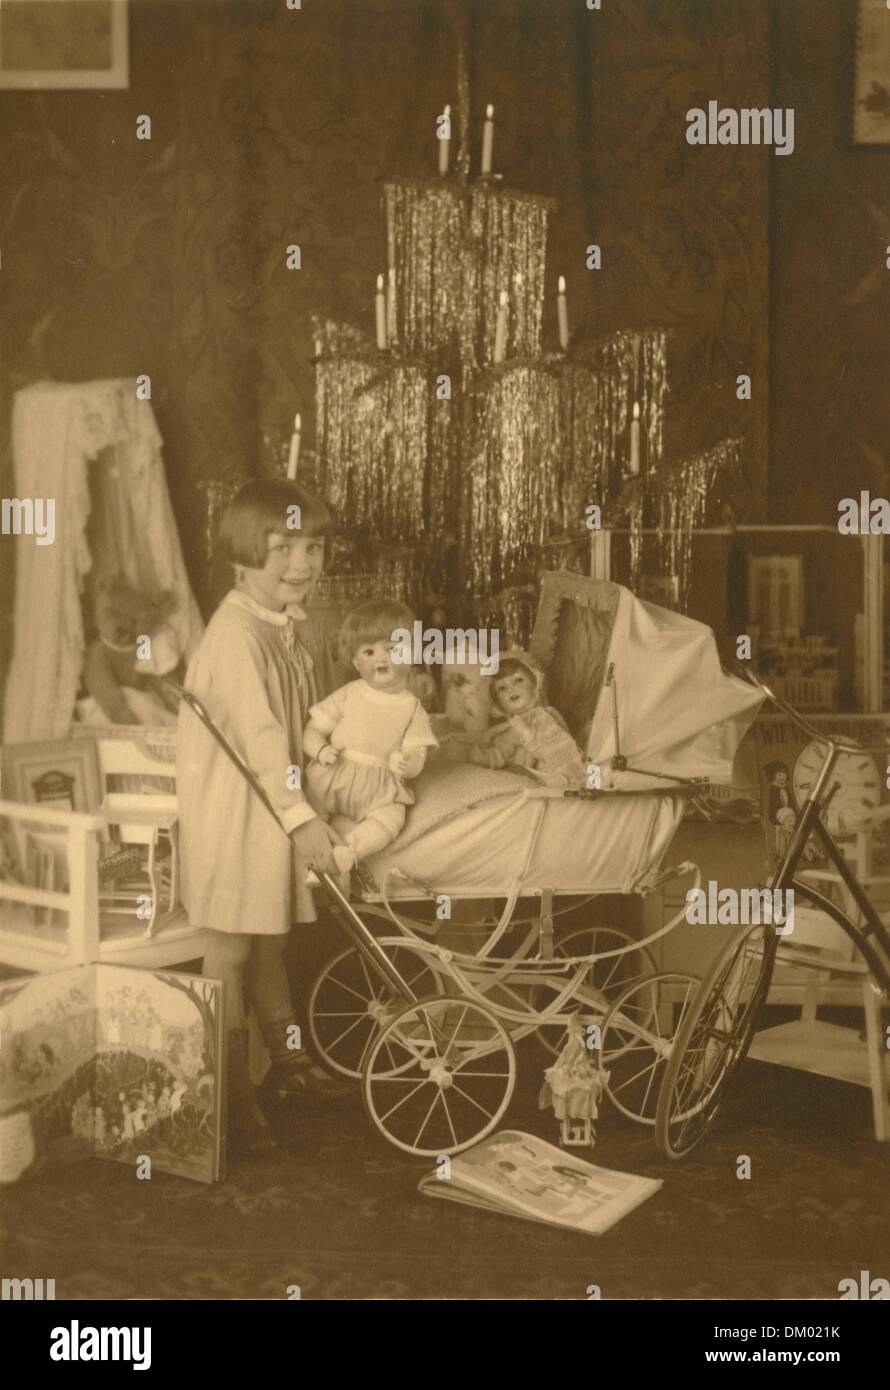 A girl is pictured with a doll pram and presents in front of Christmas tree decorated with lametta, undated photograph (around 1927). Photo: Deutsche Fotothek/Berger Stock Photo